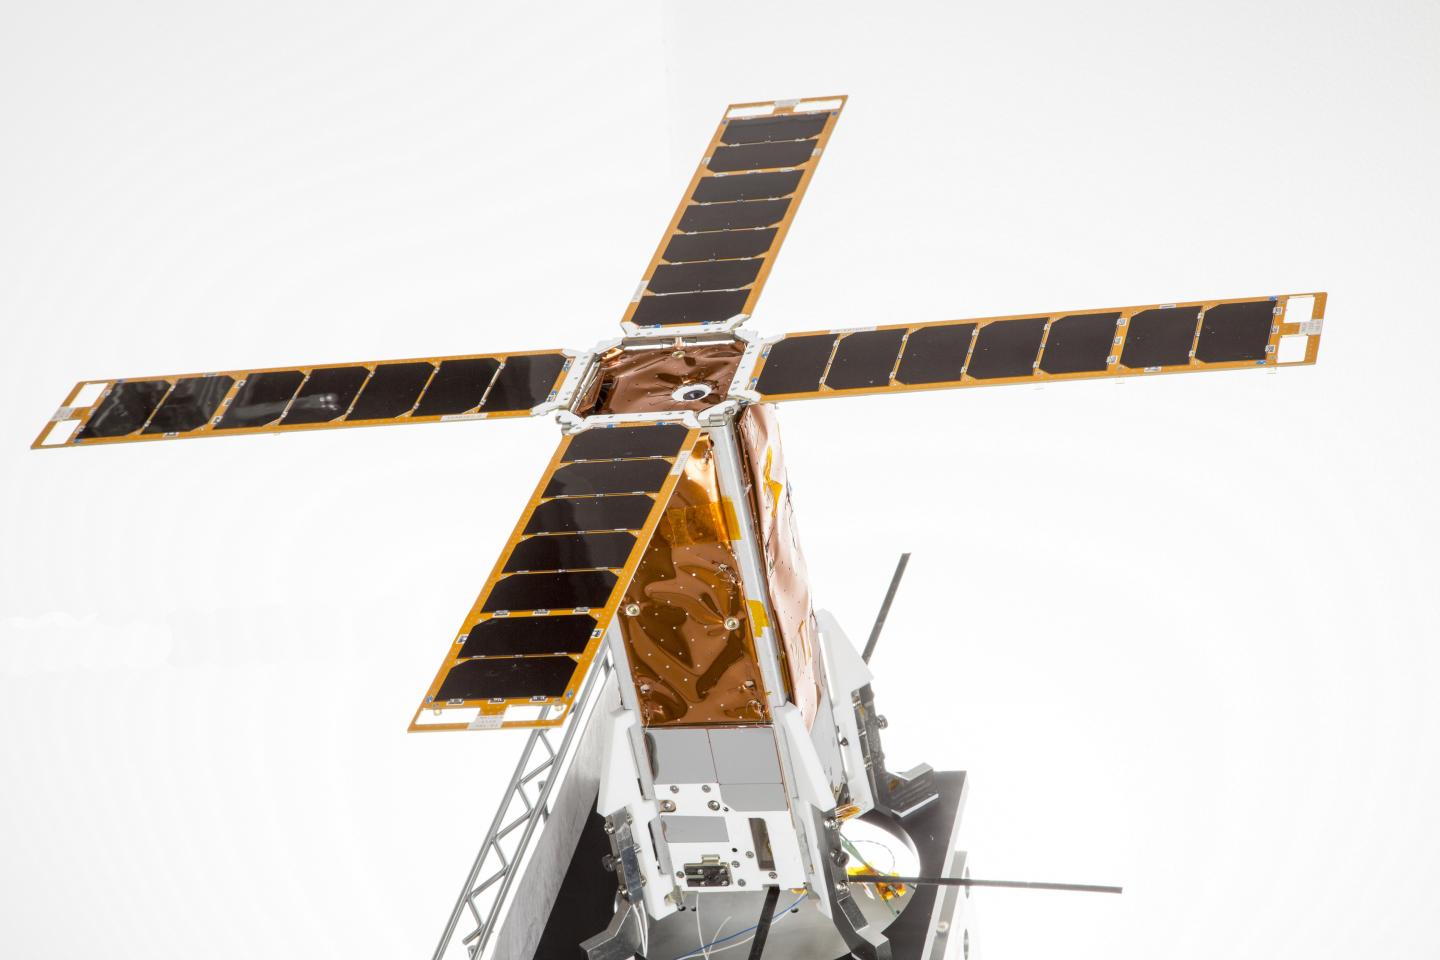 First Israeli Nanosatellite for Academic Research Developed by Ben-Gurion University of the Negev Launched